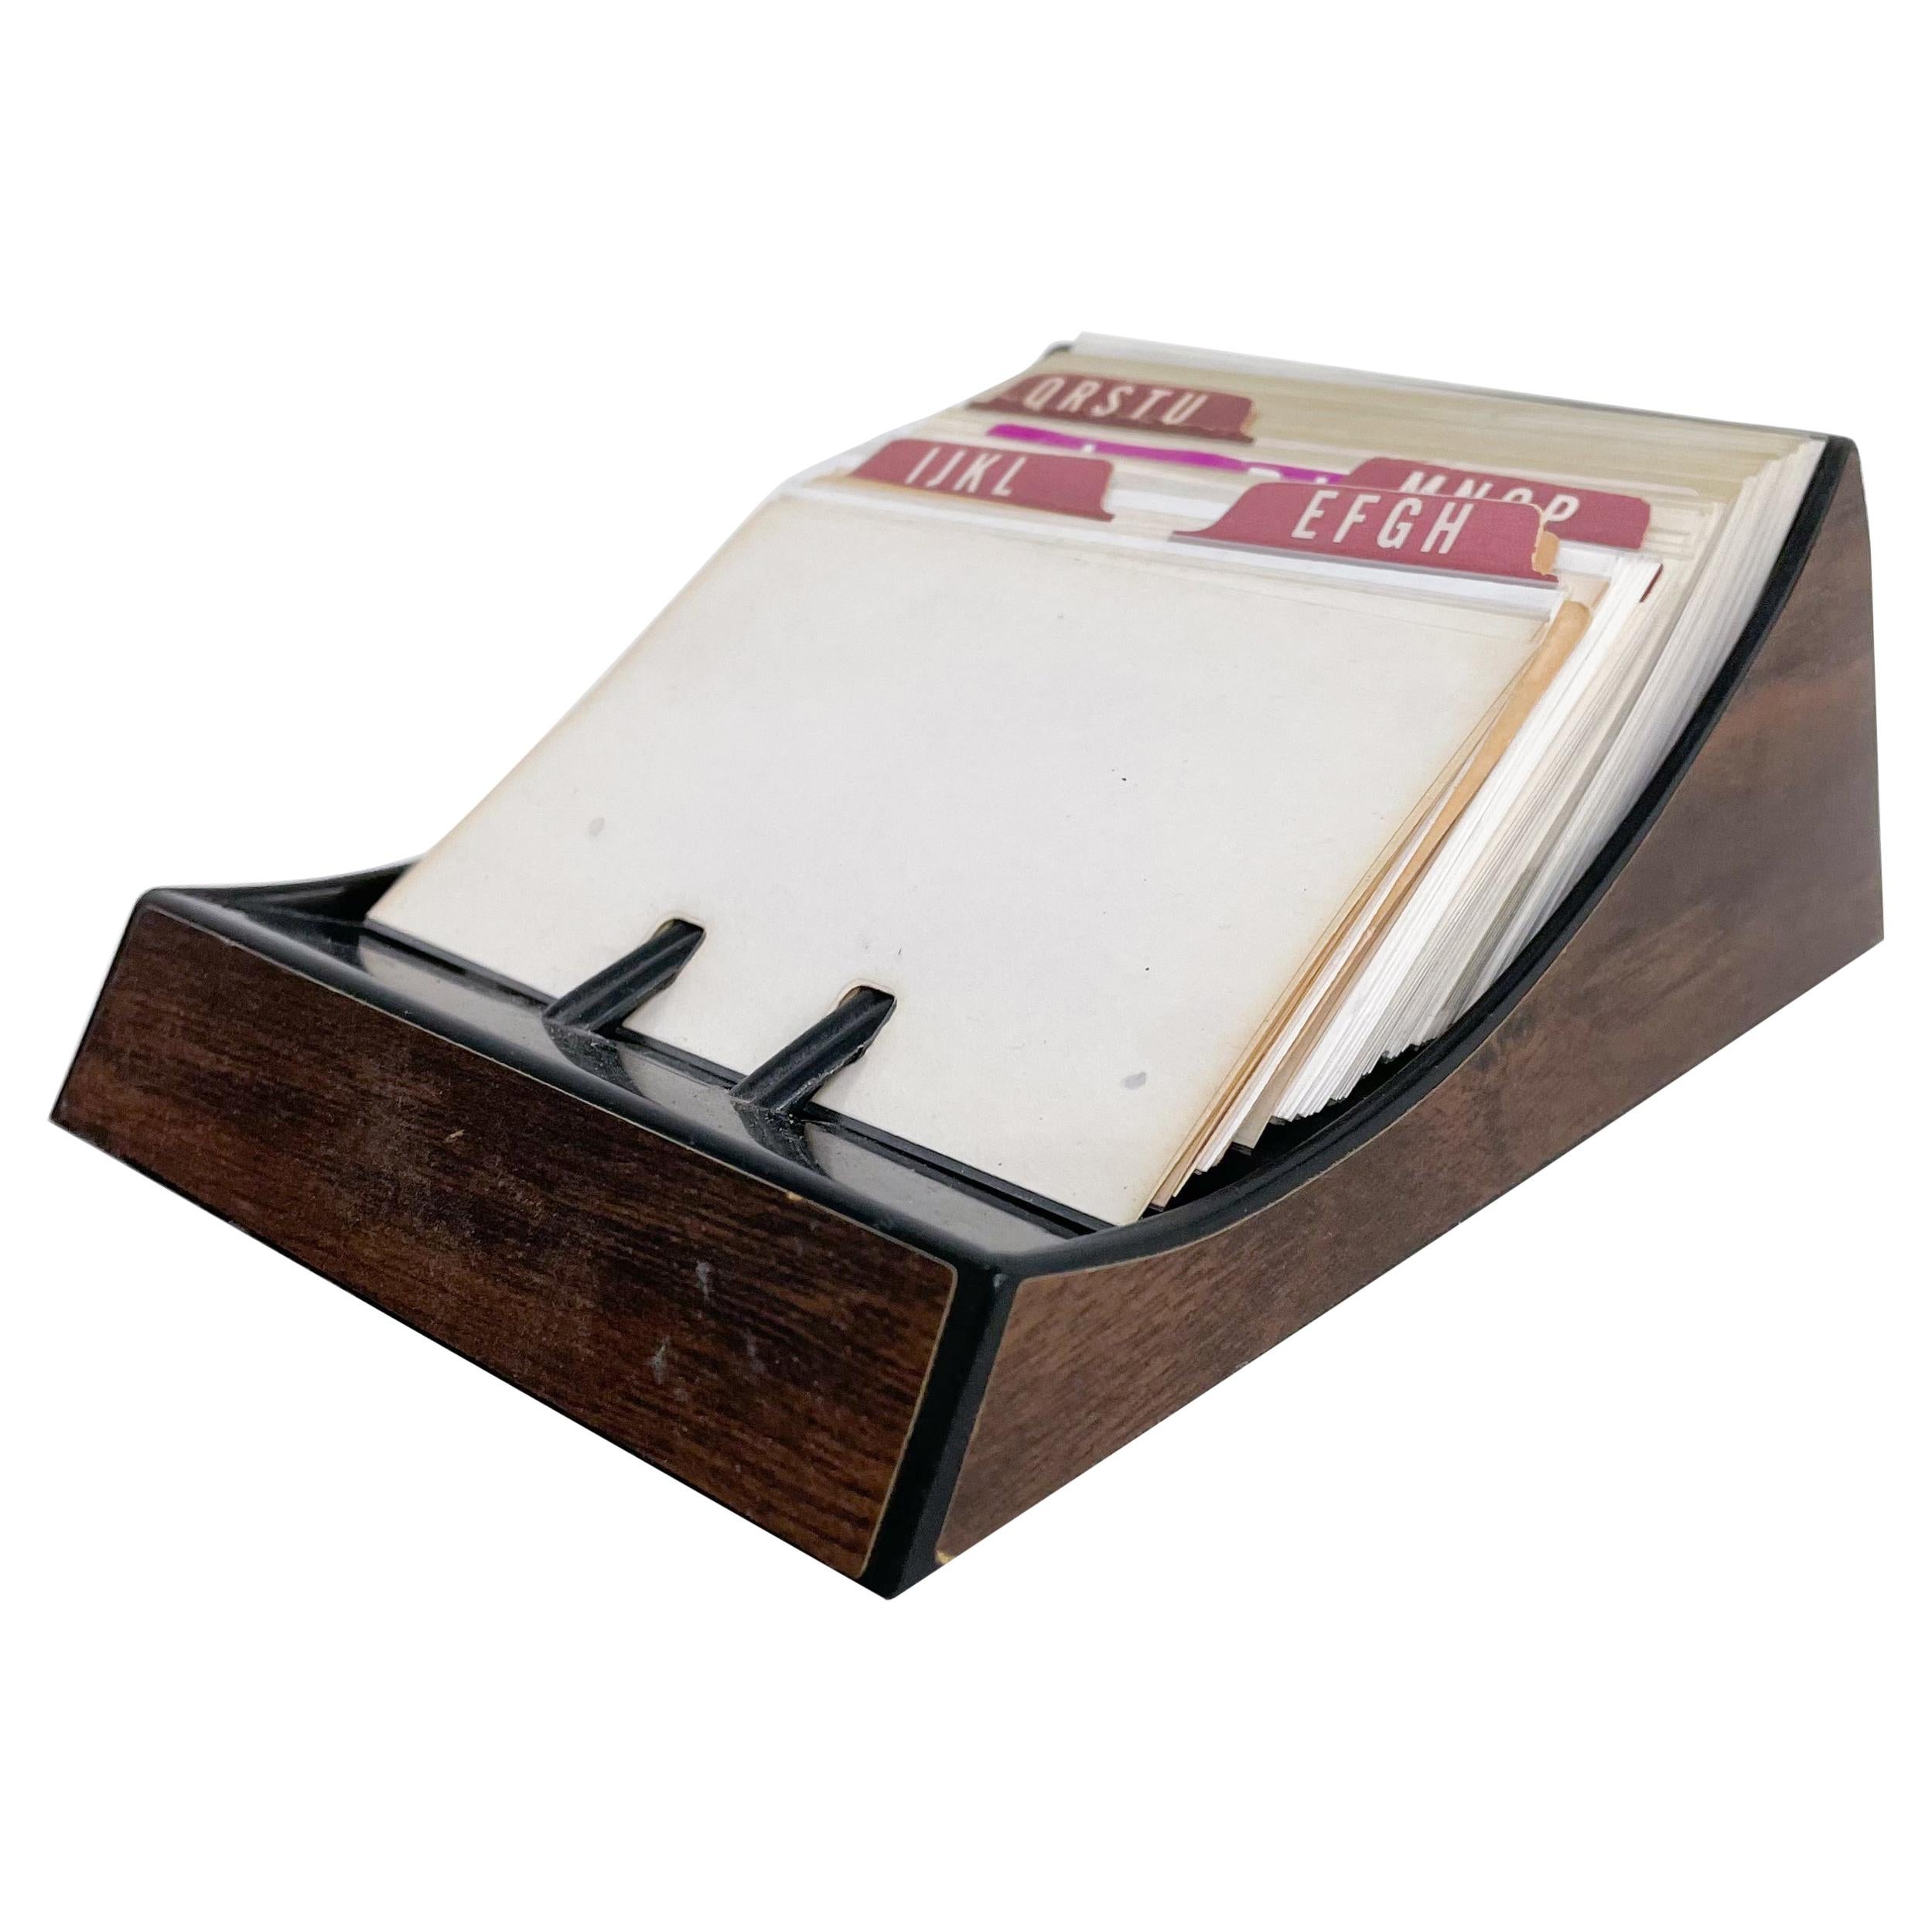 Rolodex
Vintage Rolodex Card File Tray in Faux Wood Midcentury Modern Madmen Classic
6.25 x 4.5 x 2.25 tall
Beautifully aged paper file cards.
Original Unrestored Preowned Fair Vintage Condition. 
Selling as presents in images.
Fast shipping.
 